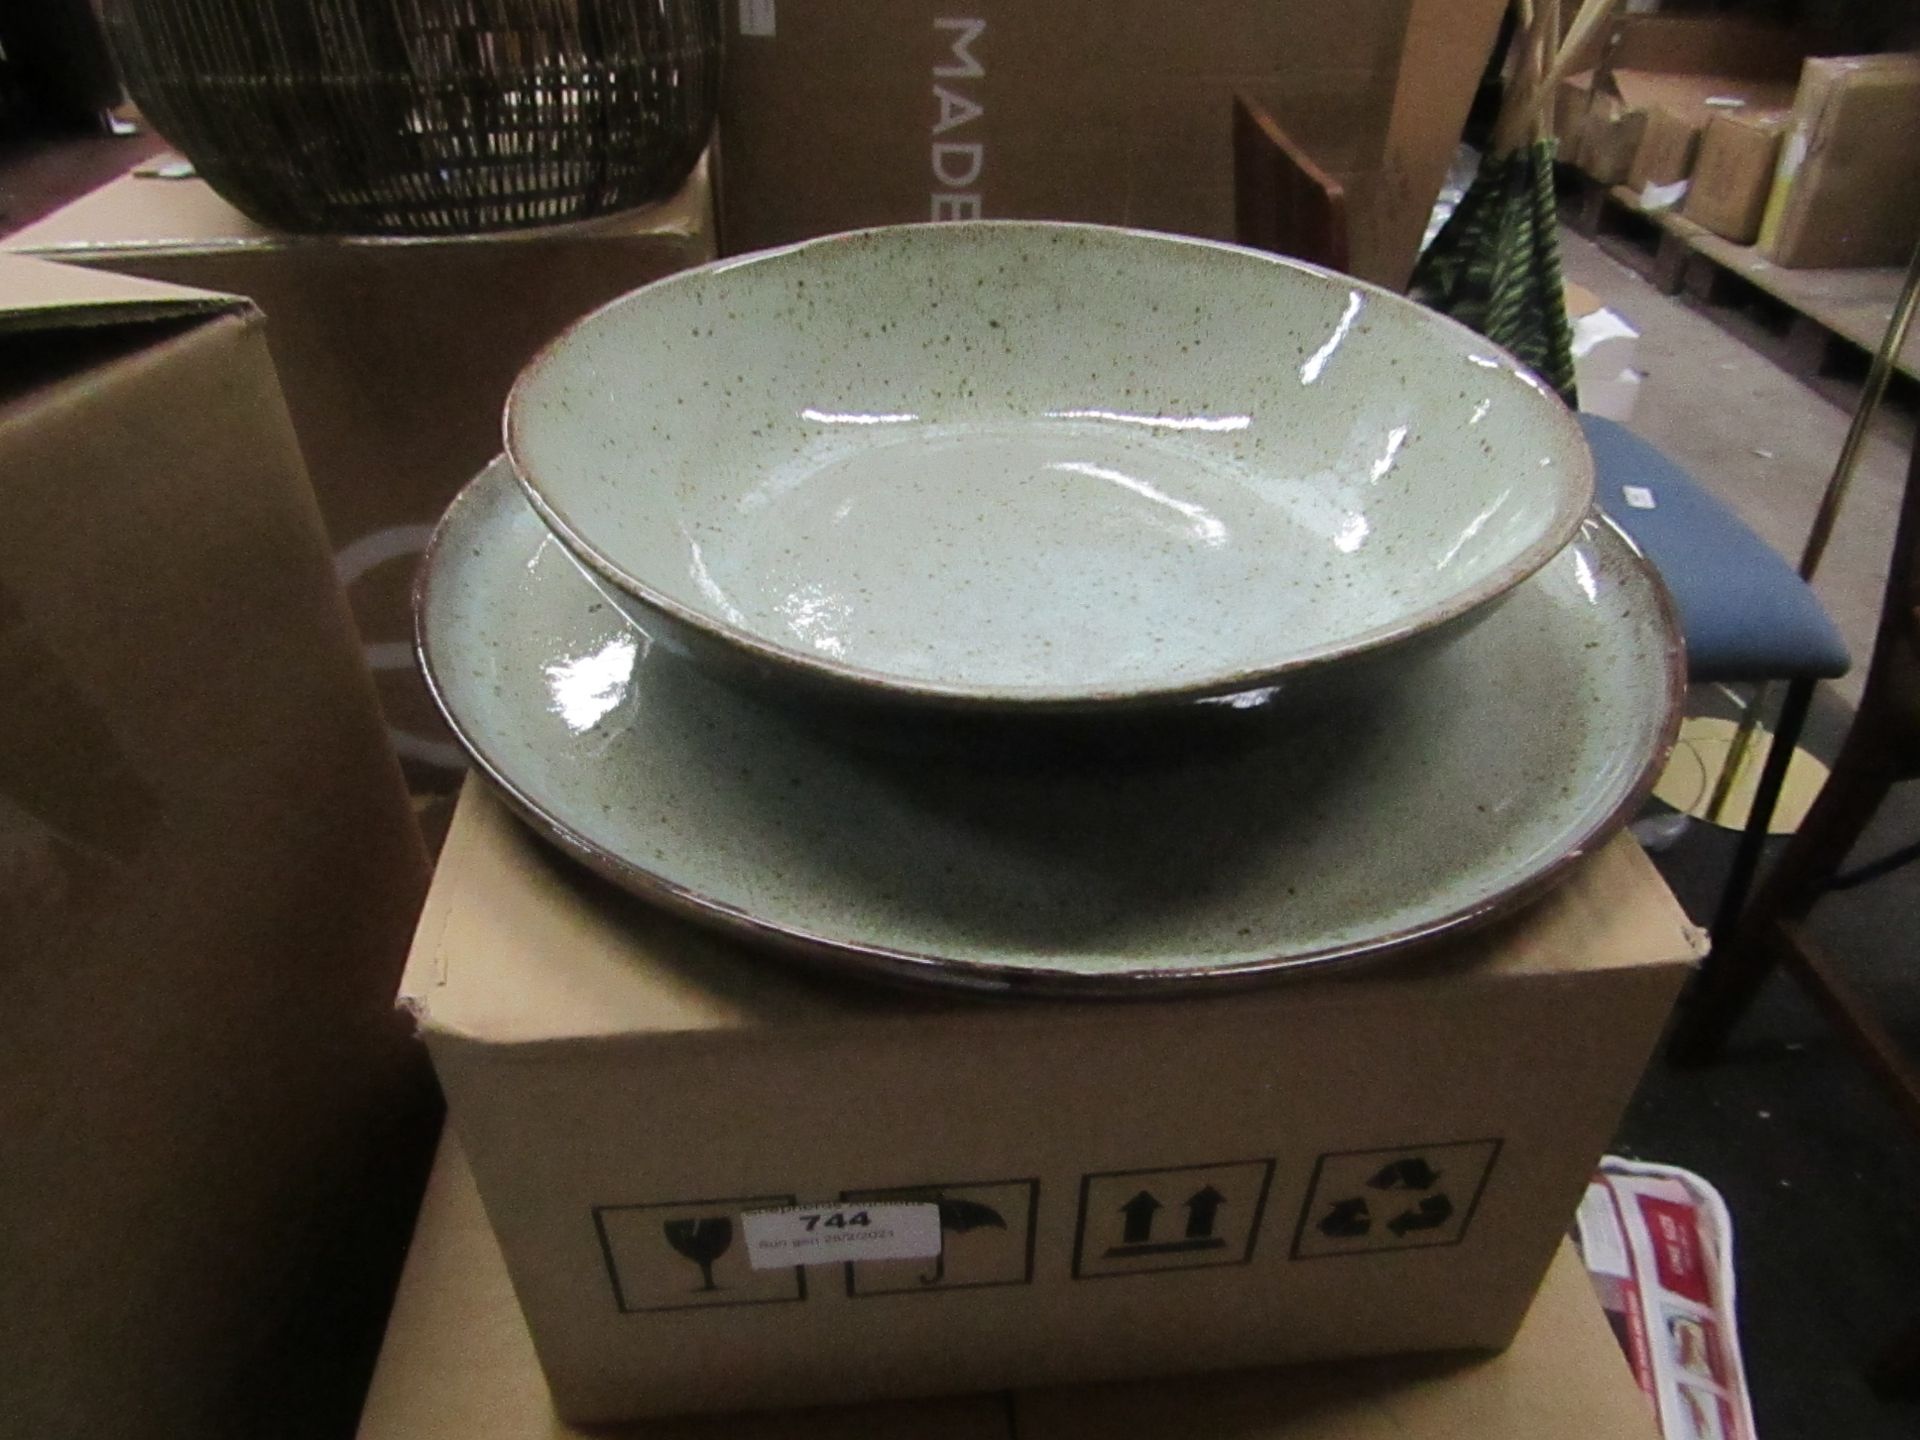 | 1x | MADE.COM CROCKERY SET, INCLUDES 4 PLATES AND 4 BOWLS | UNCHECKED AND BOX | RRP £-|